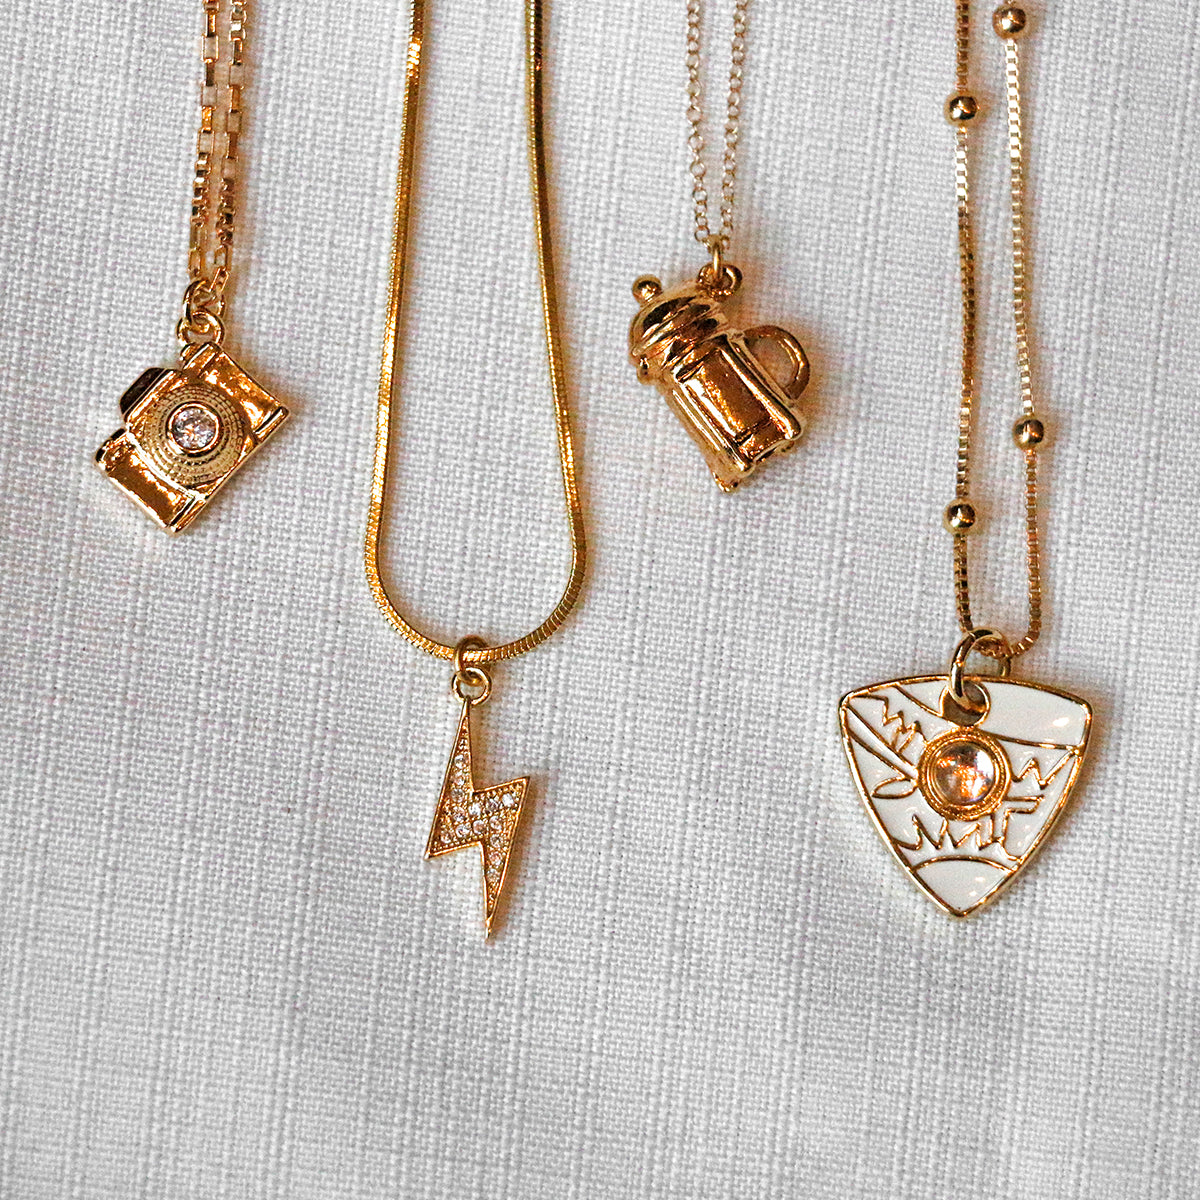 Nuance Icon Charm Necklaces